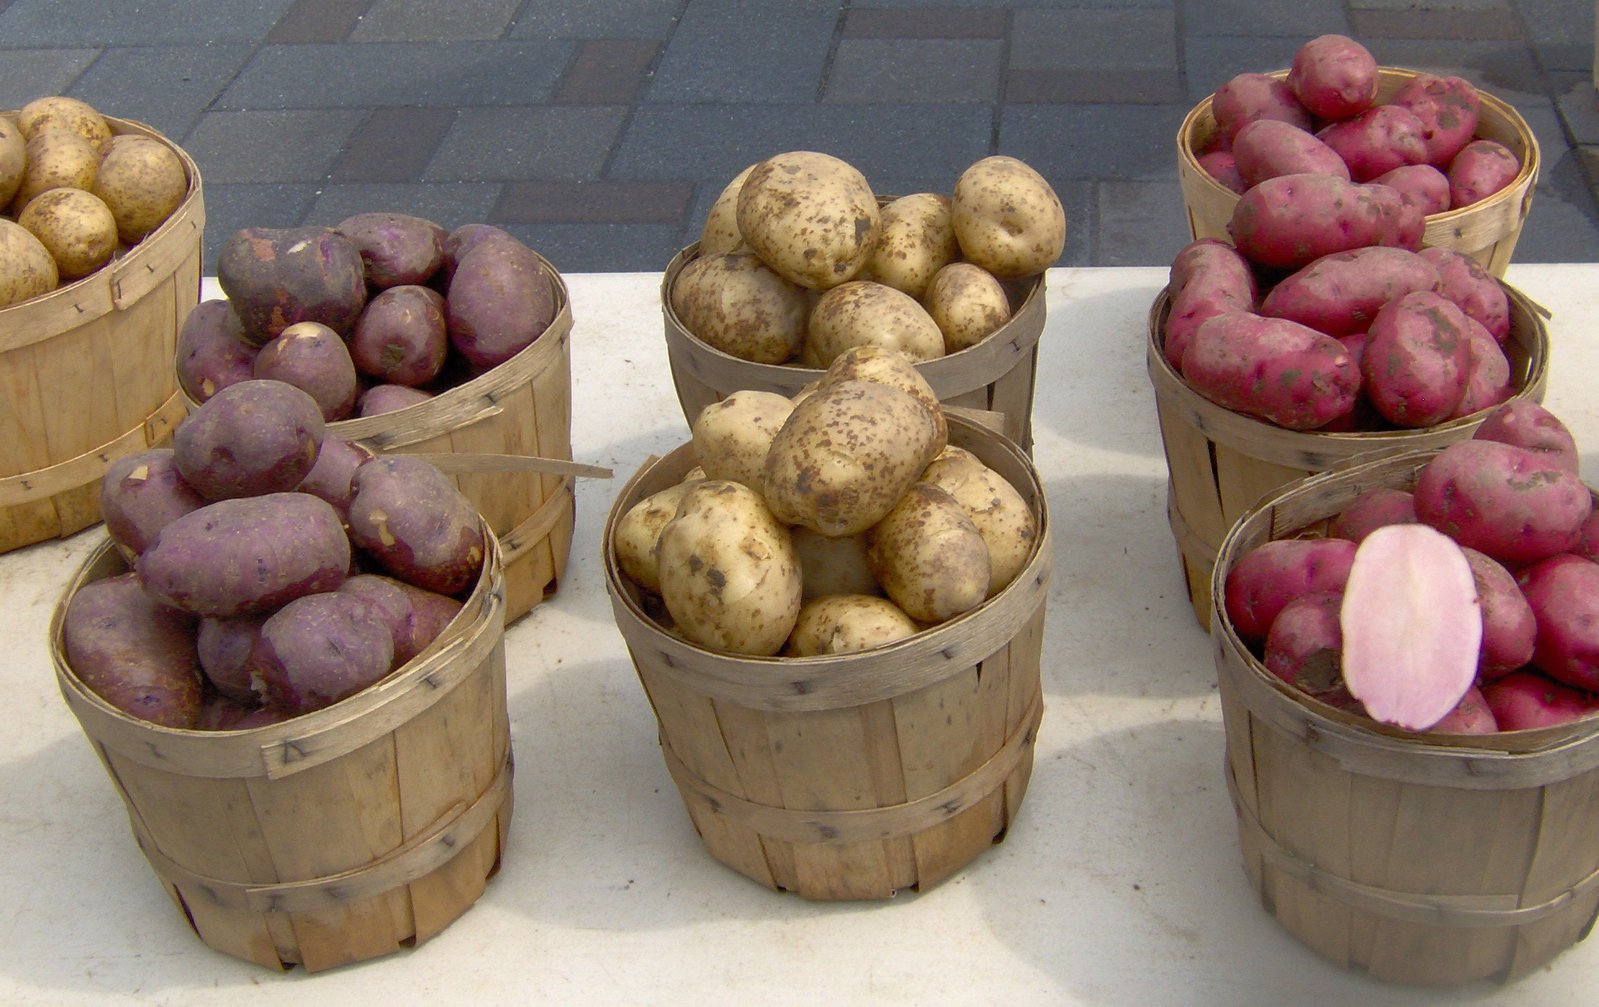 a couple of baskets full of purple potatoes